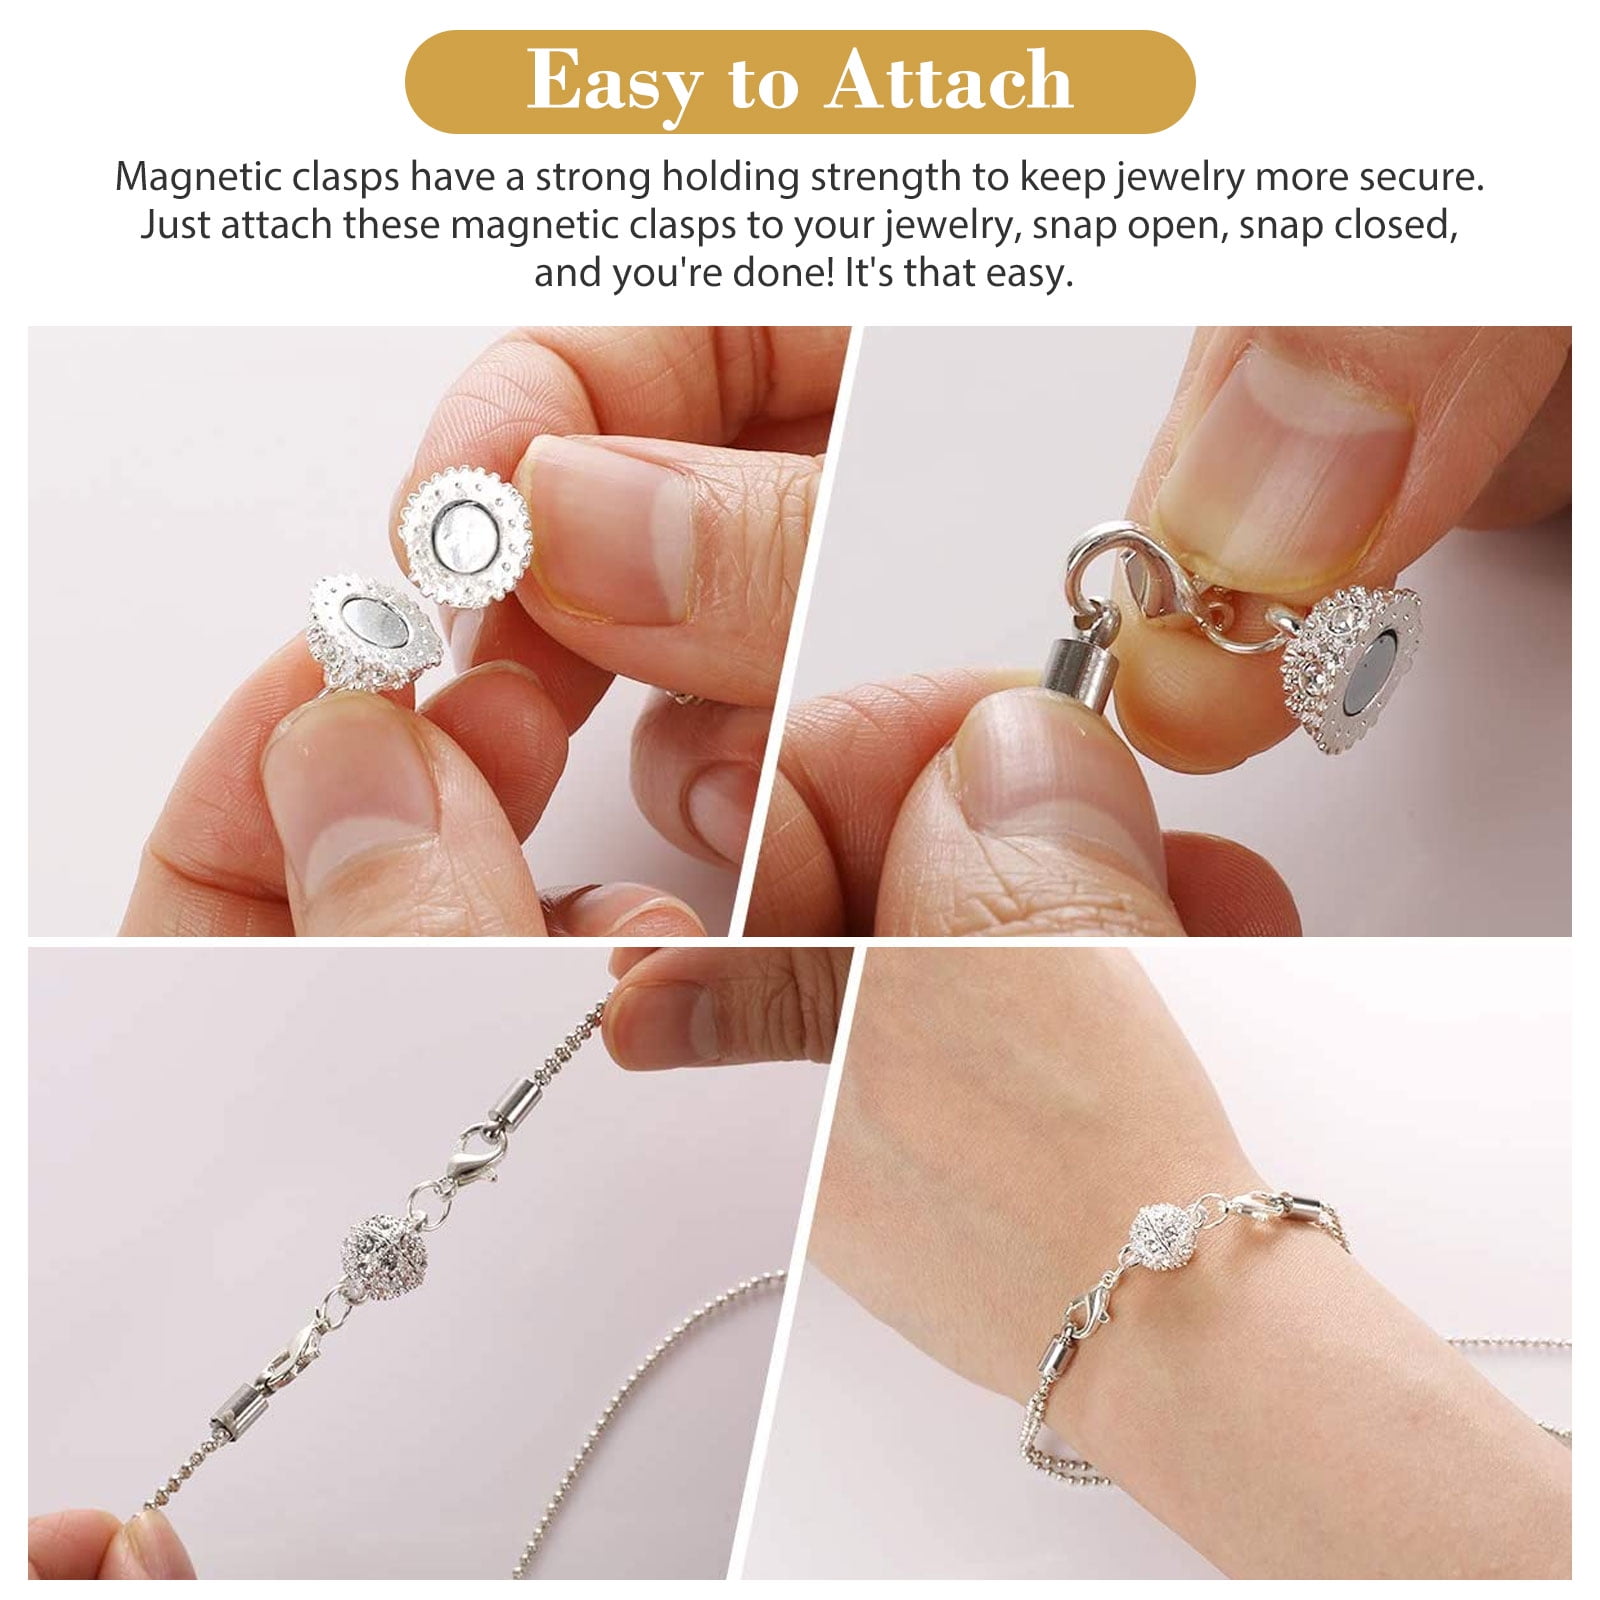 Built-In Safety Locking Magnetic Jewelry Clasp for Necklace and Bracelet Light Small Extender Lobster Clasps Pineapple Texture Metallic Finishes